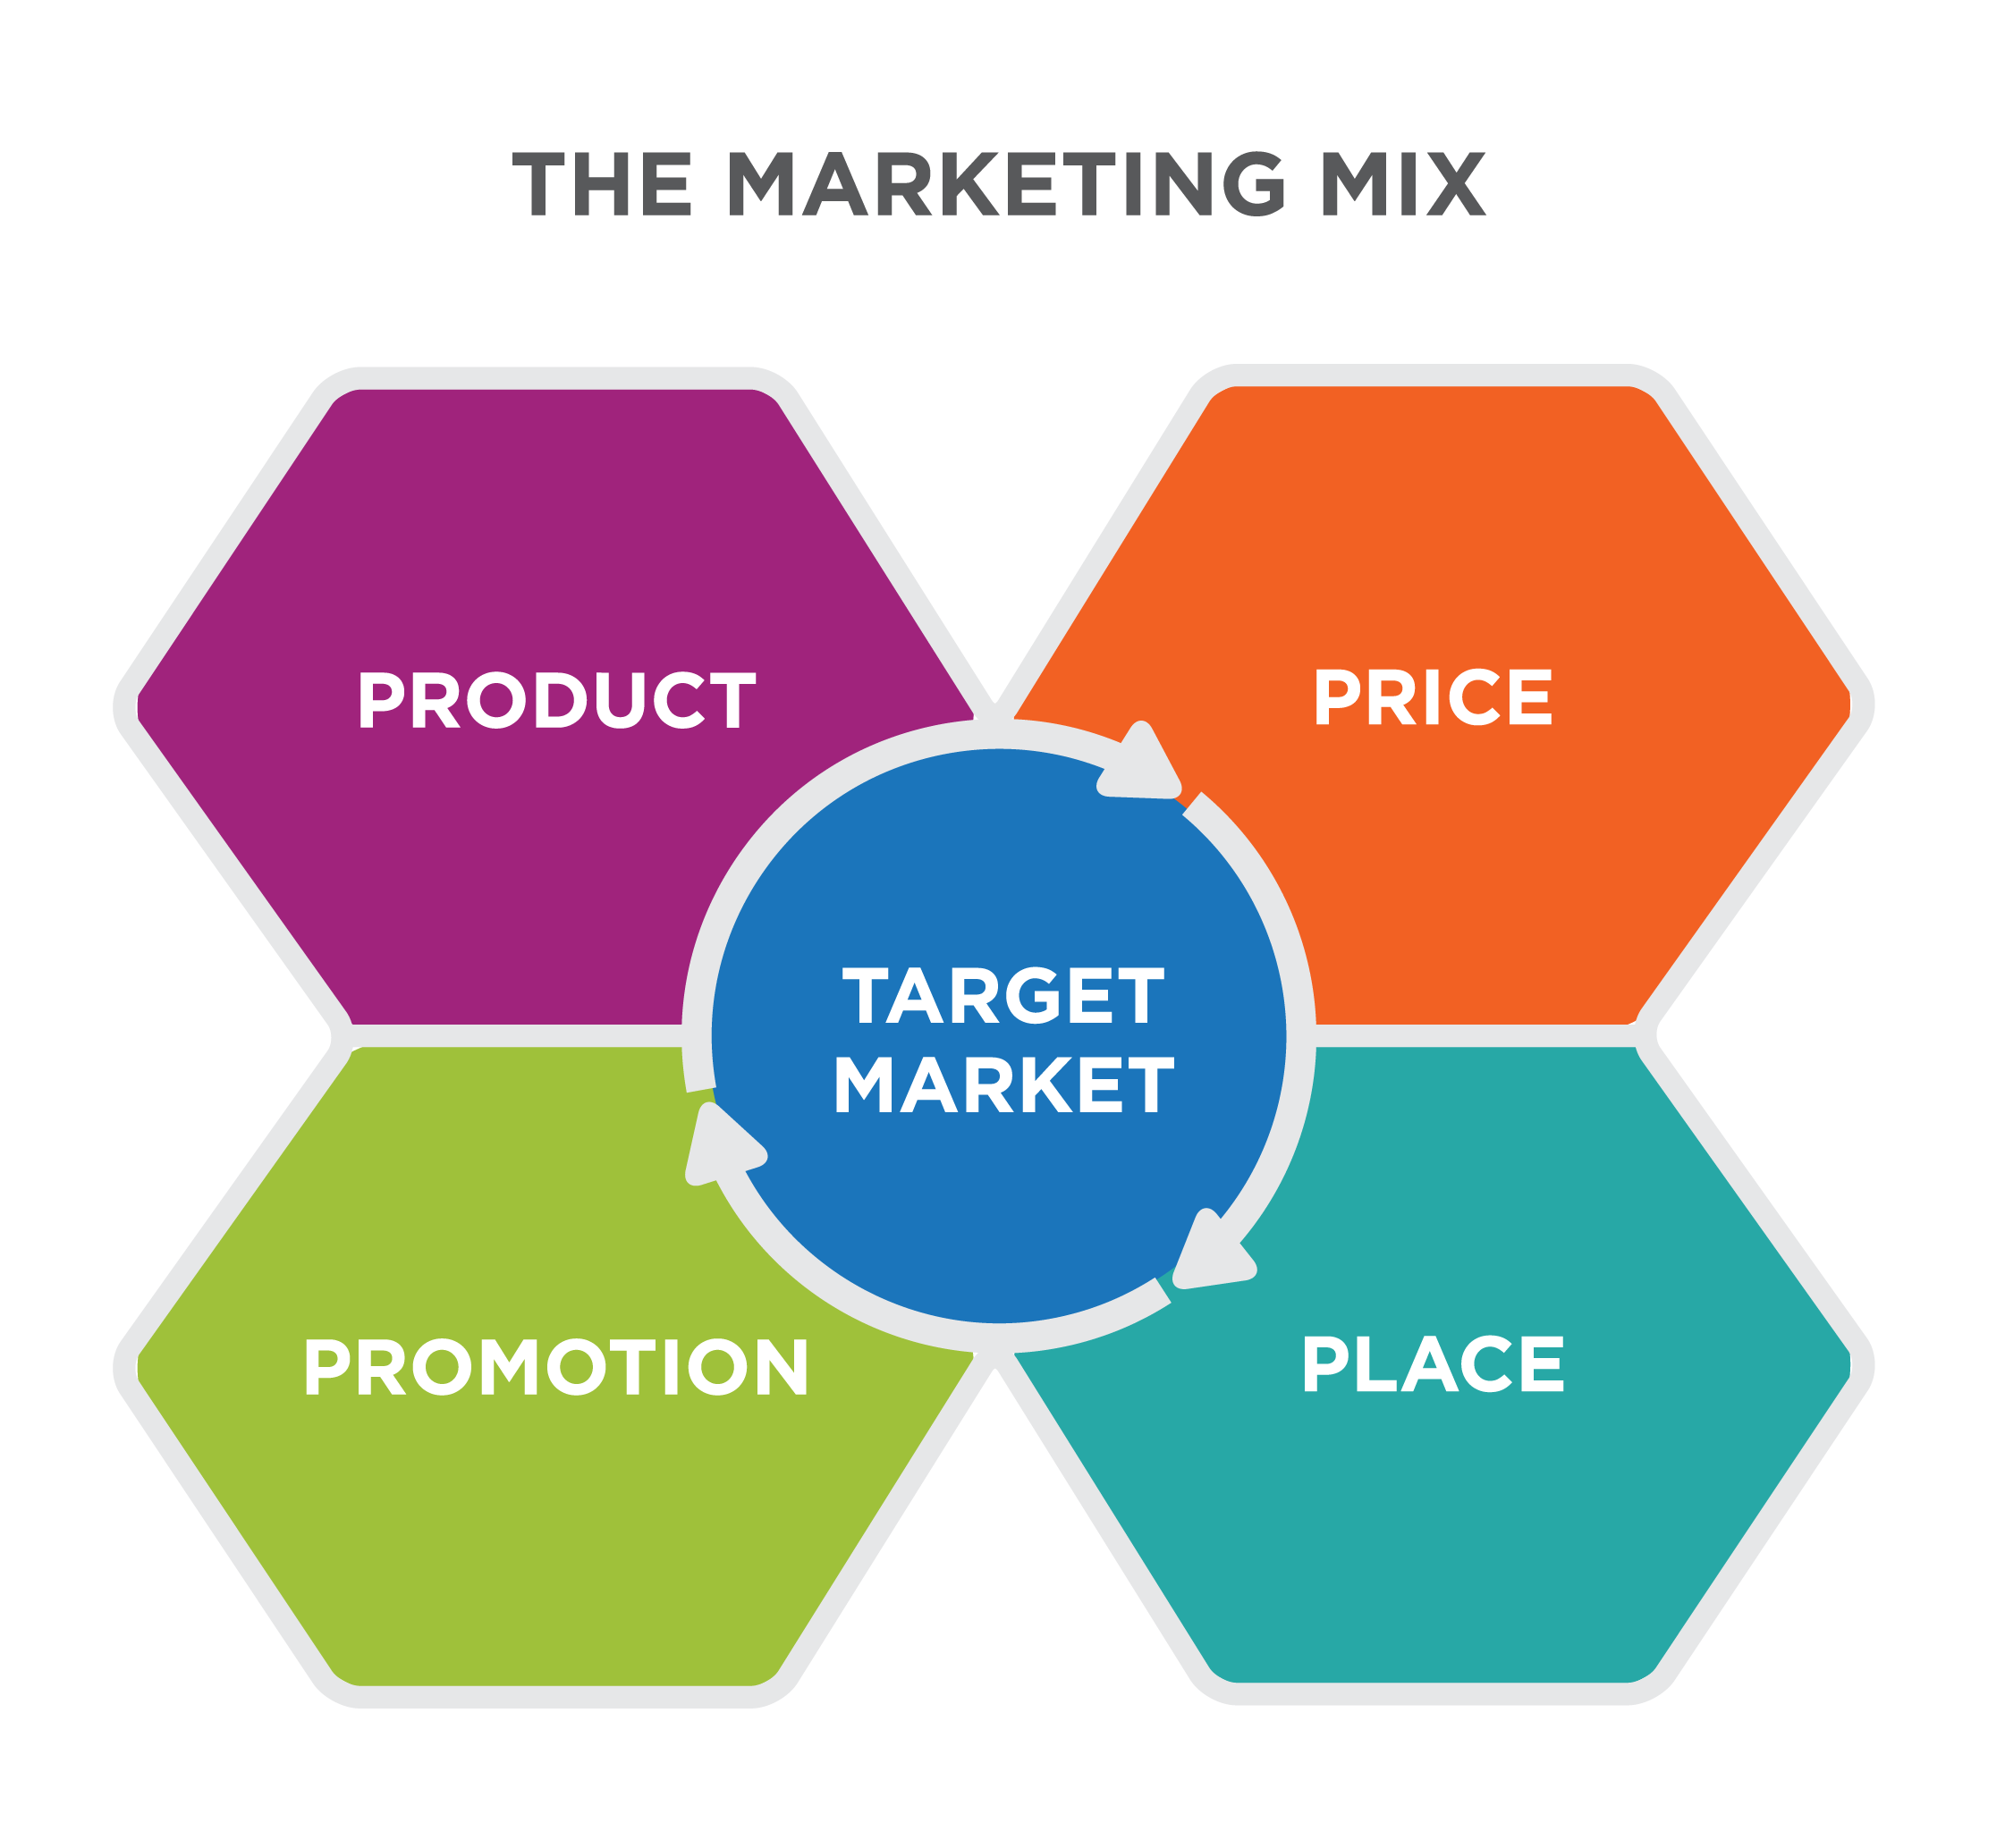 The Marketing Mix 1: The Target Market is surrounded by the 4 Ps: Product, Price, Place, and Promotion.